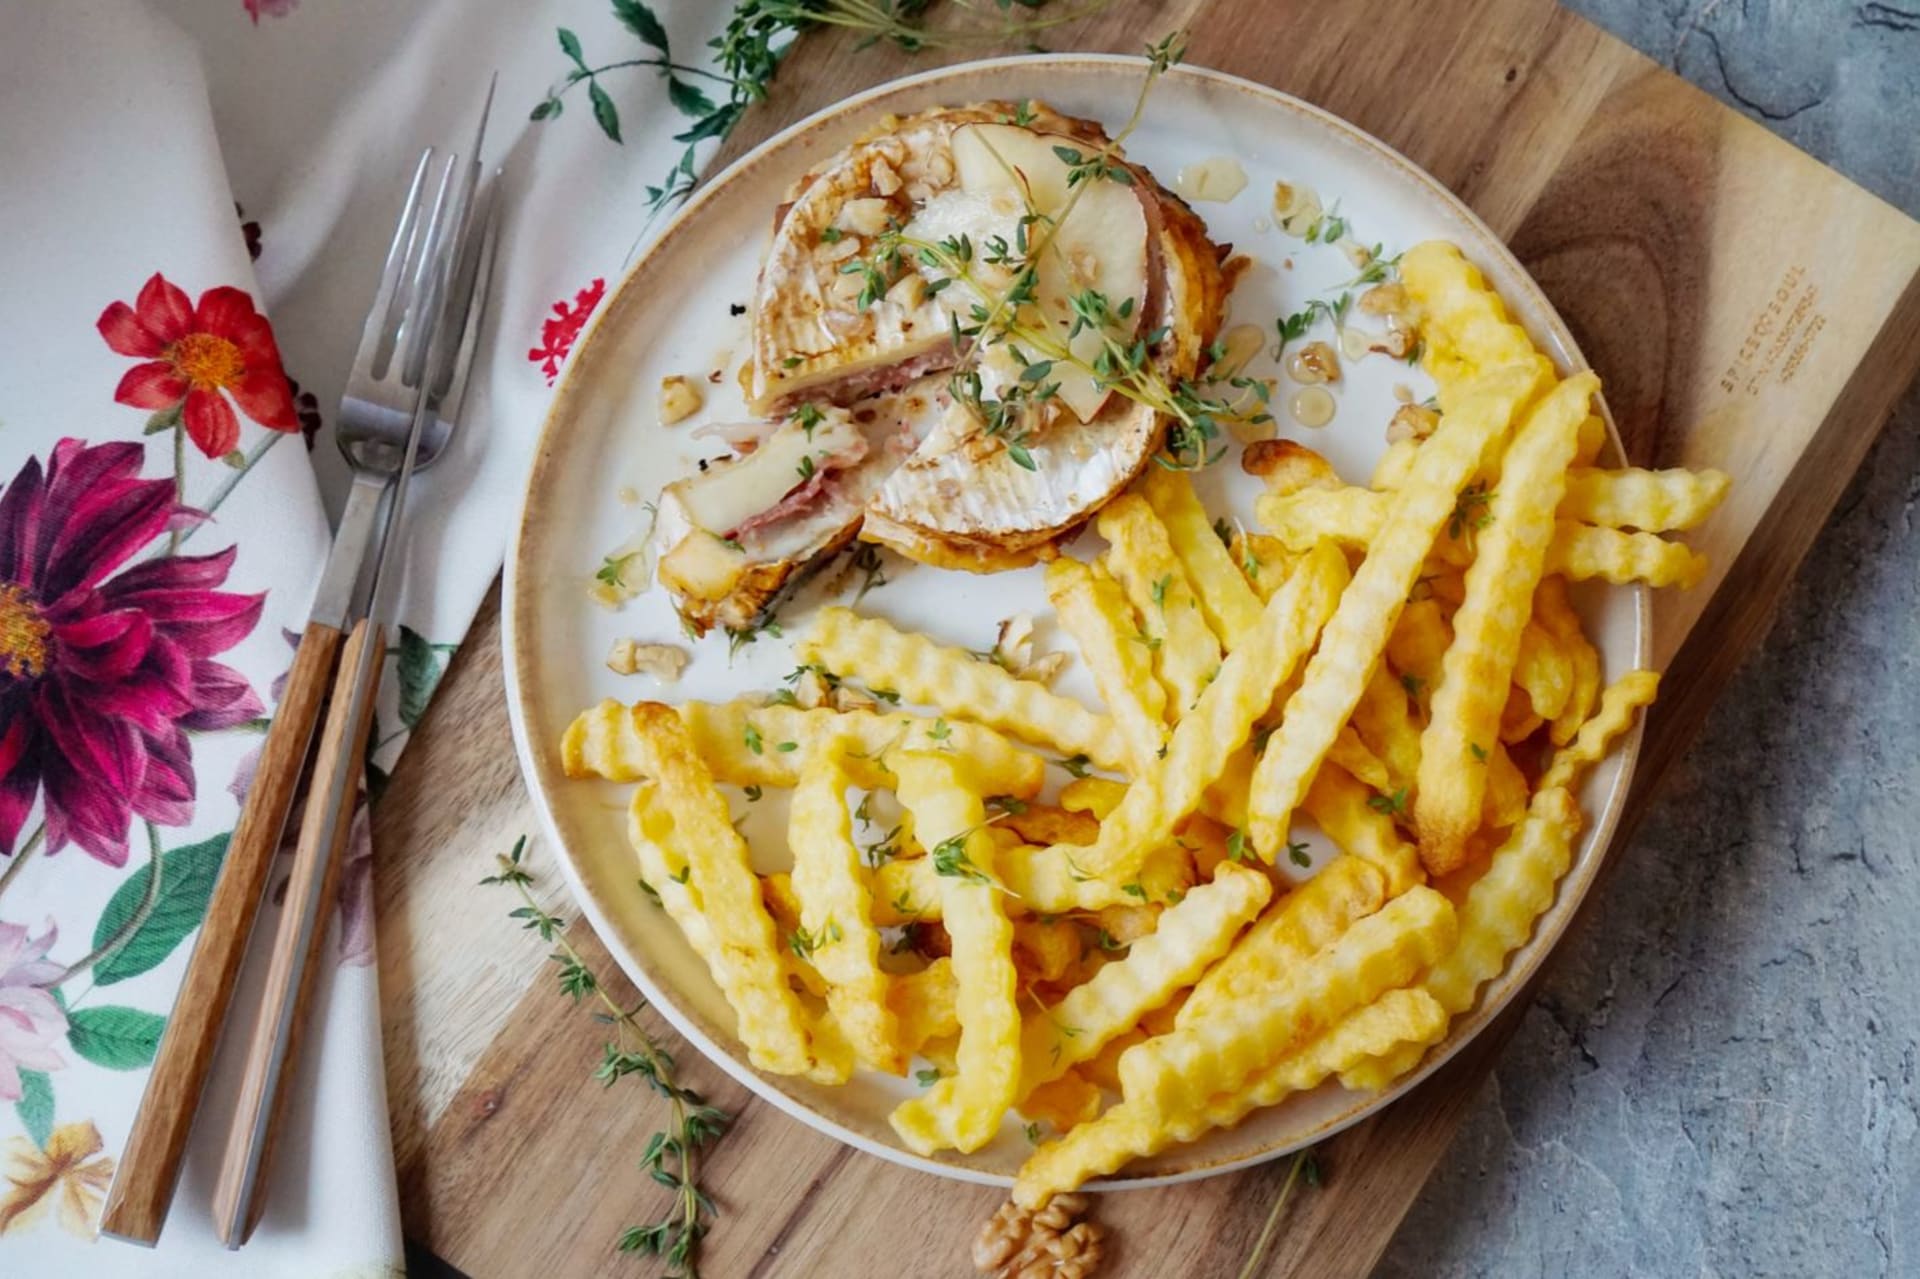 Baked armen stuffed with pear and ham with french fries